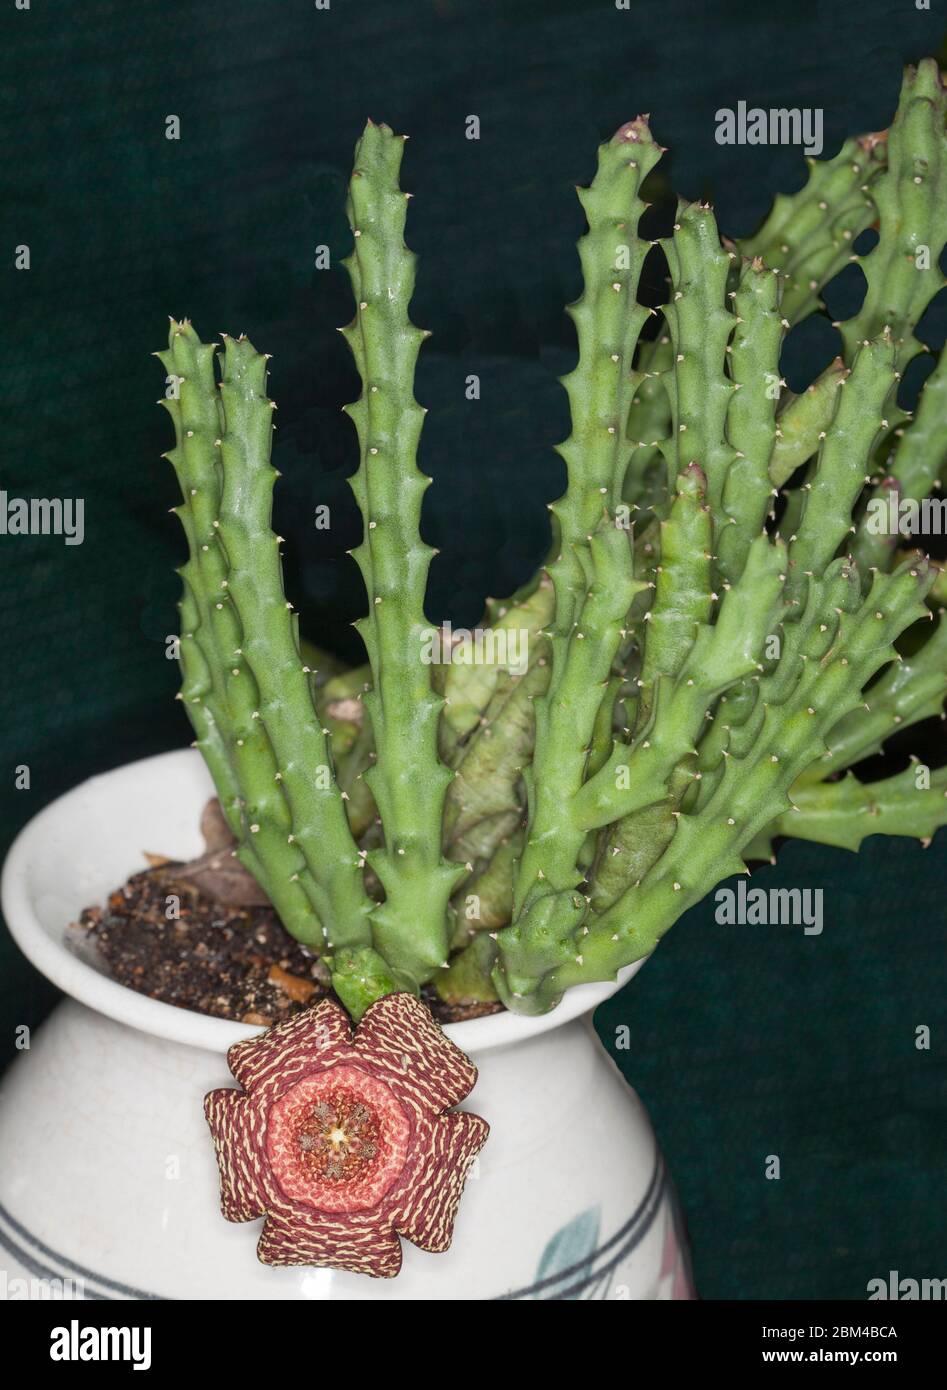 Rare and unusual succulent plant, Orbea variegata, withgreen stems and strange red speckled flower growing in white pot on dark green background Stock Photo